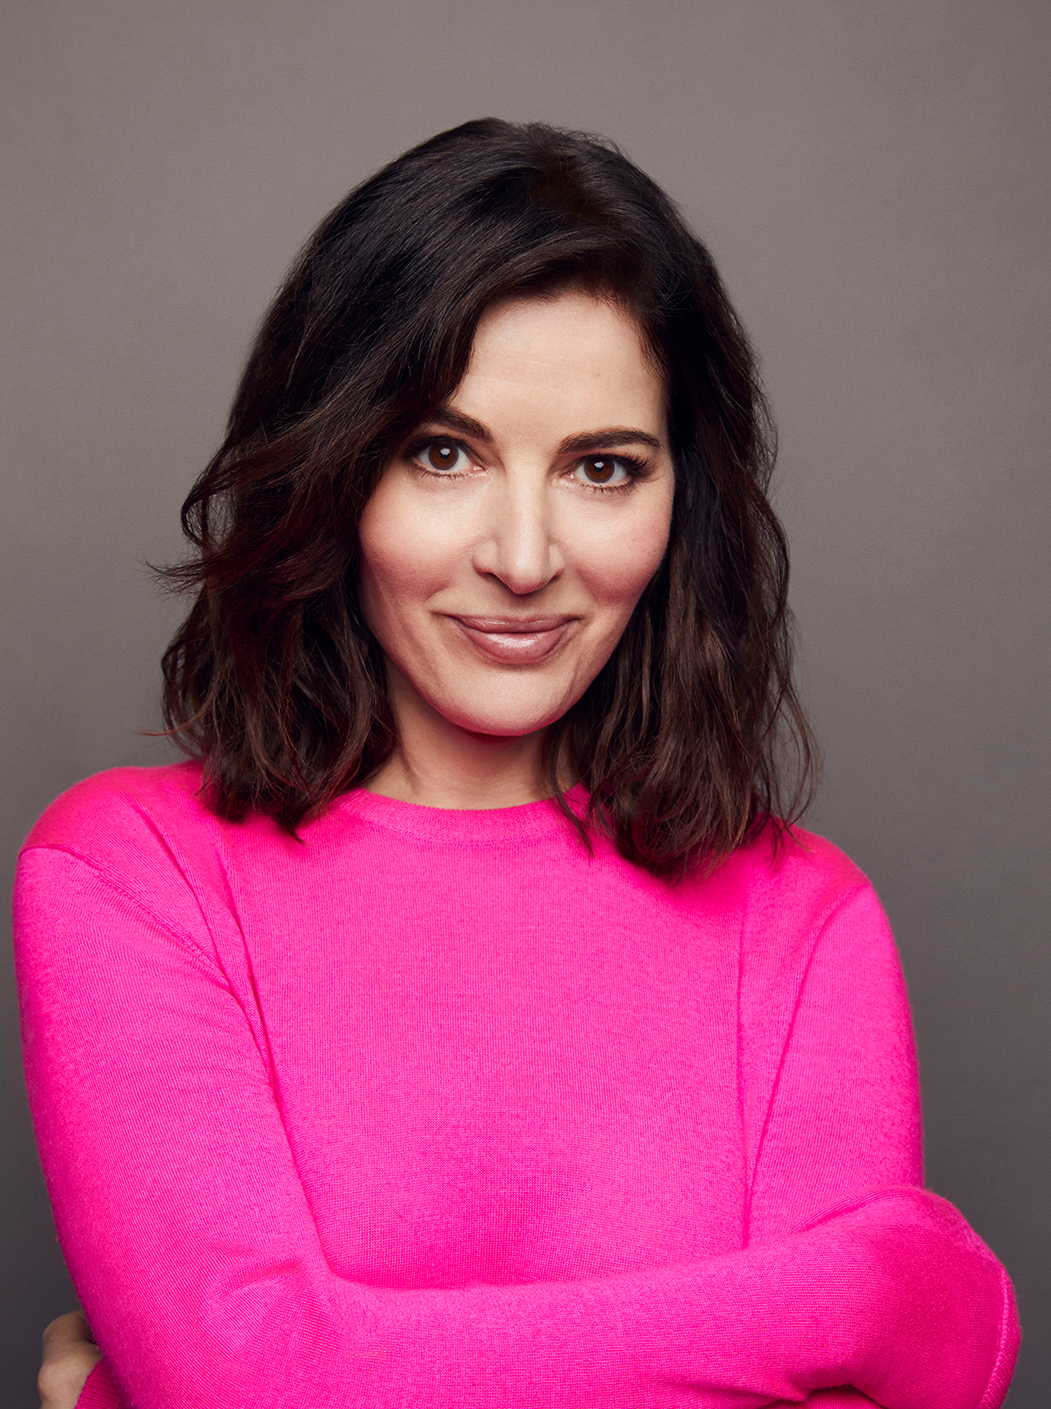 Photograph of Nigella Lawson in a bright pink top, facing the camera and smiling.